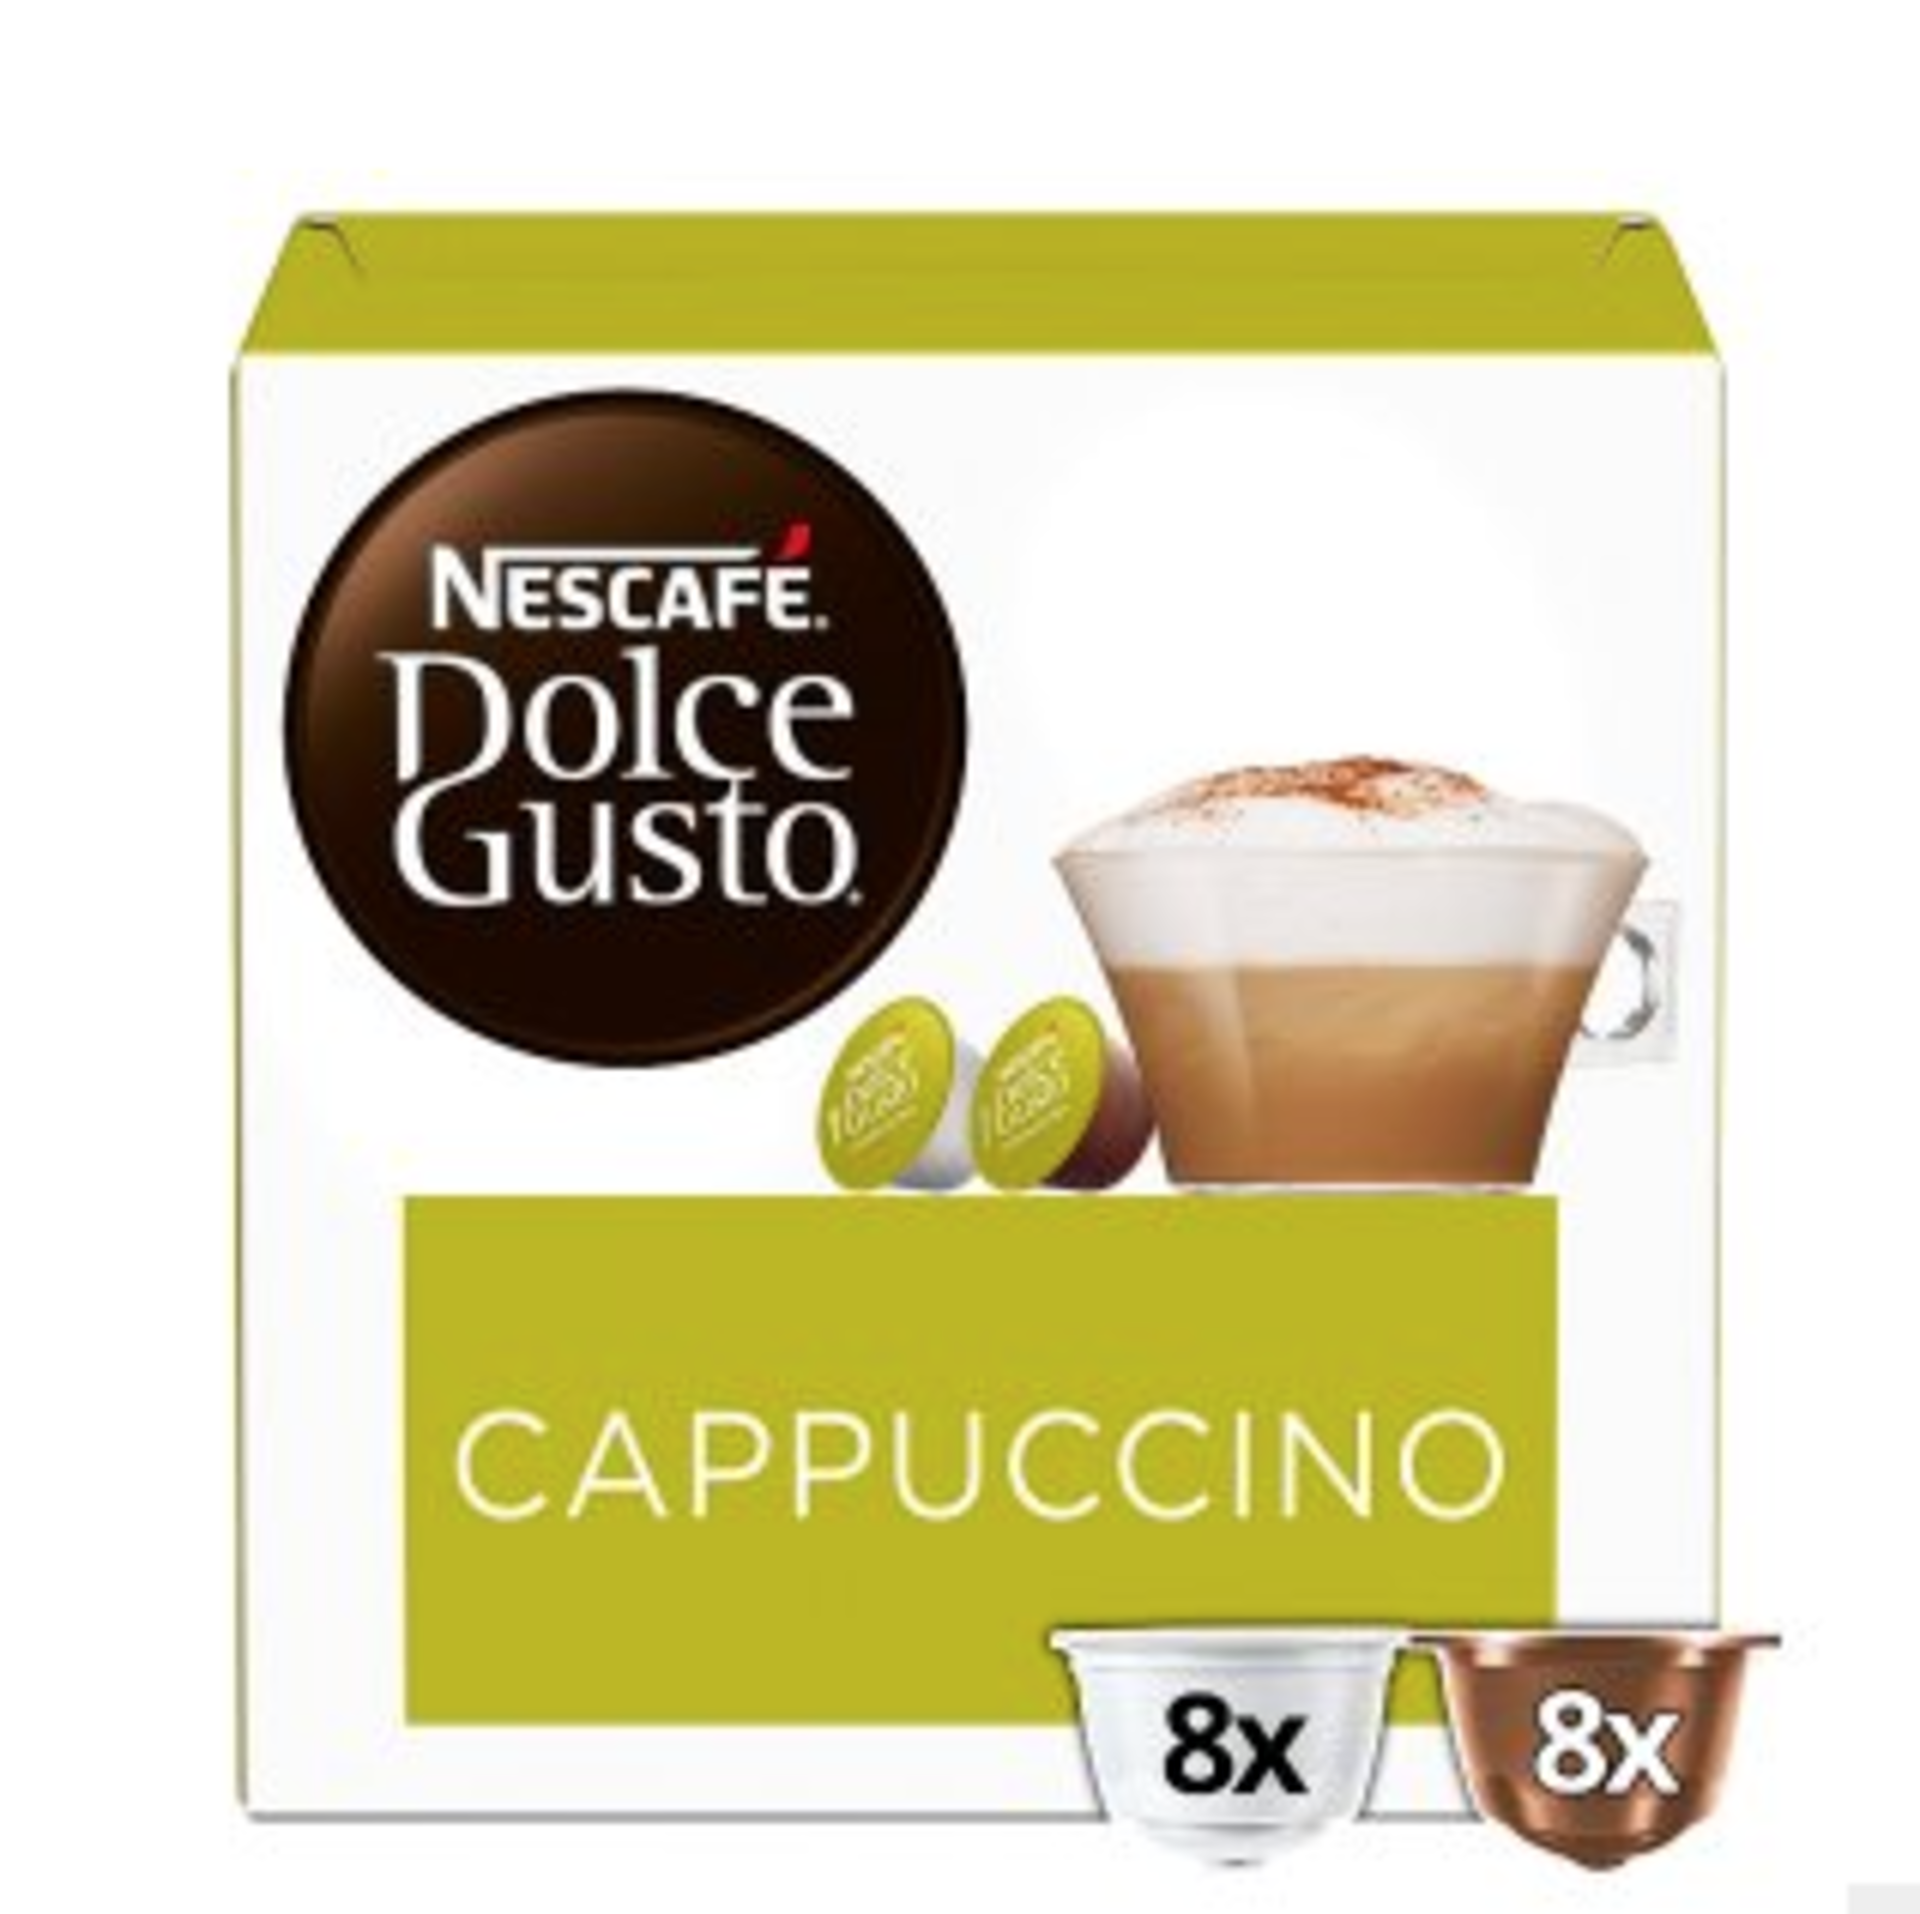 **RRP £1703 (Approx. Count 85) spW45z4957Y 20 x Nescafe Dolce Gusto Cappuccino Coffee Pods, 30 Count - Image 2 of 3